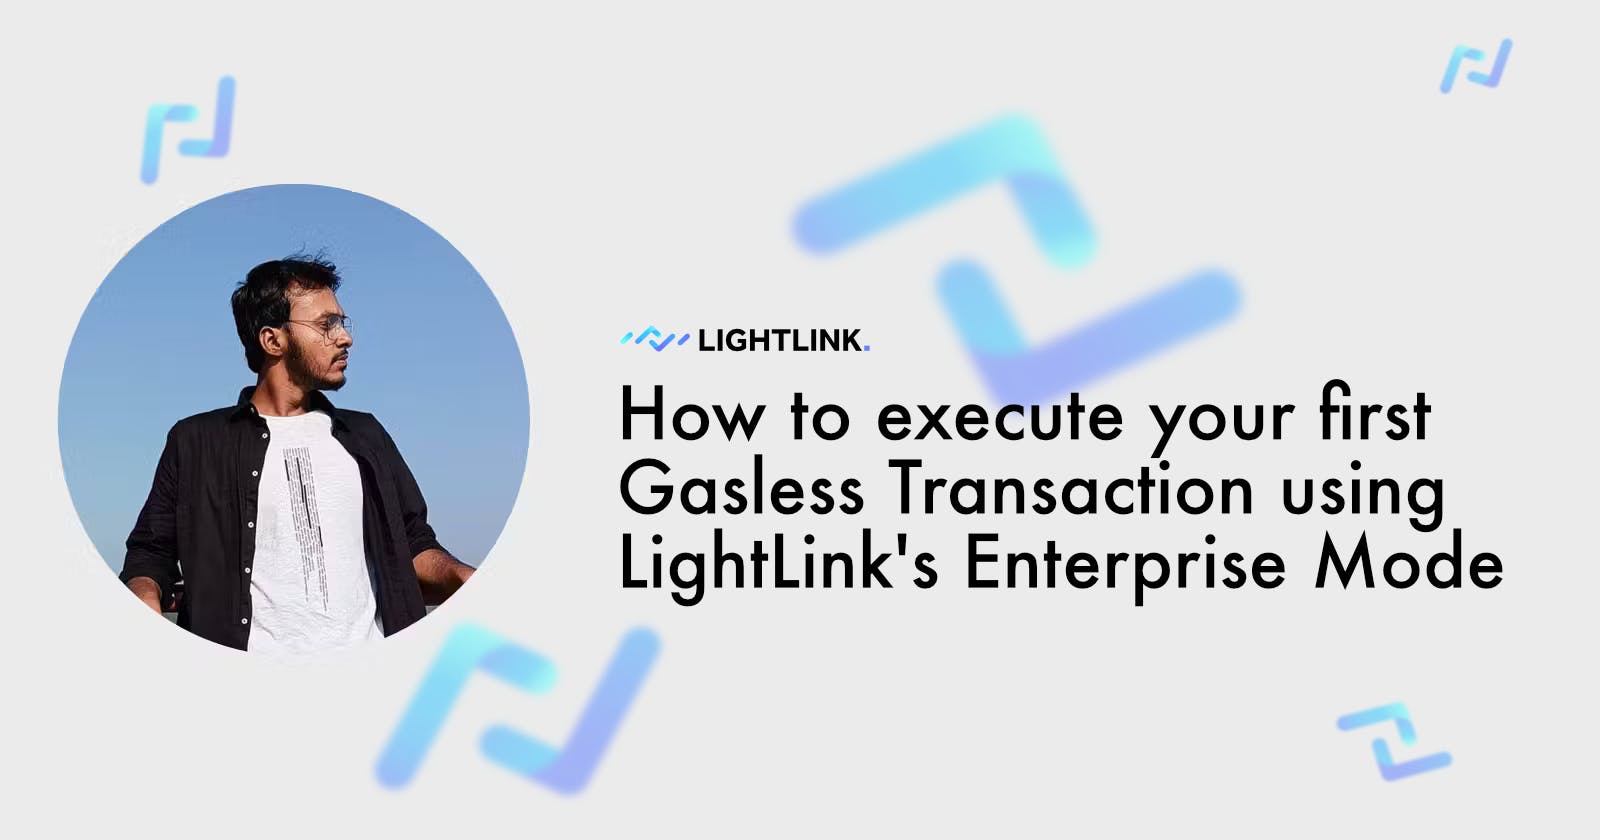 How to execute your first Gasless Transaction using LightLink's Enterprise Mode